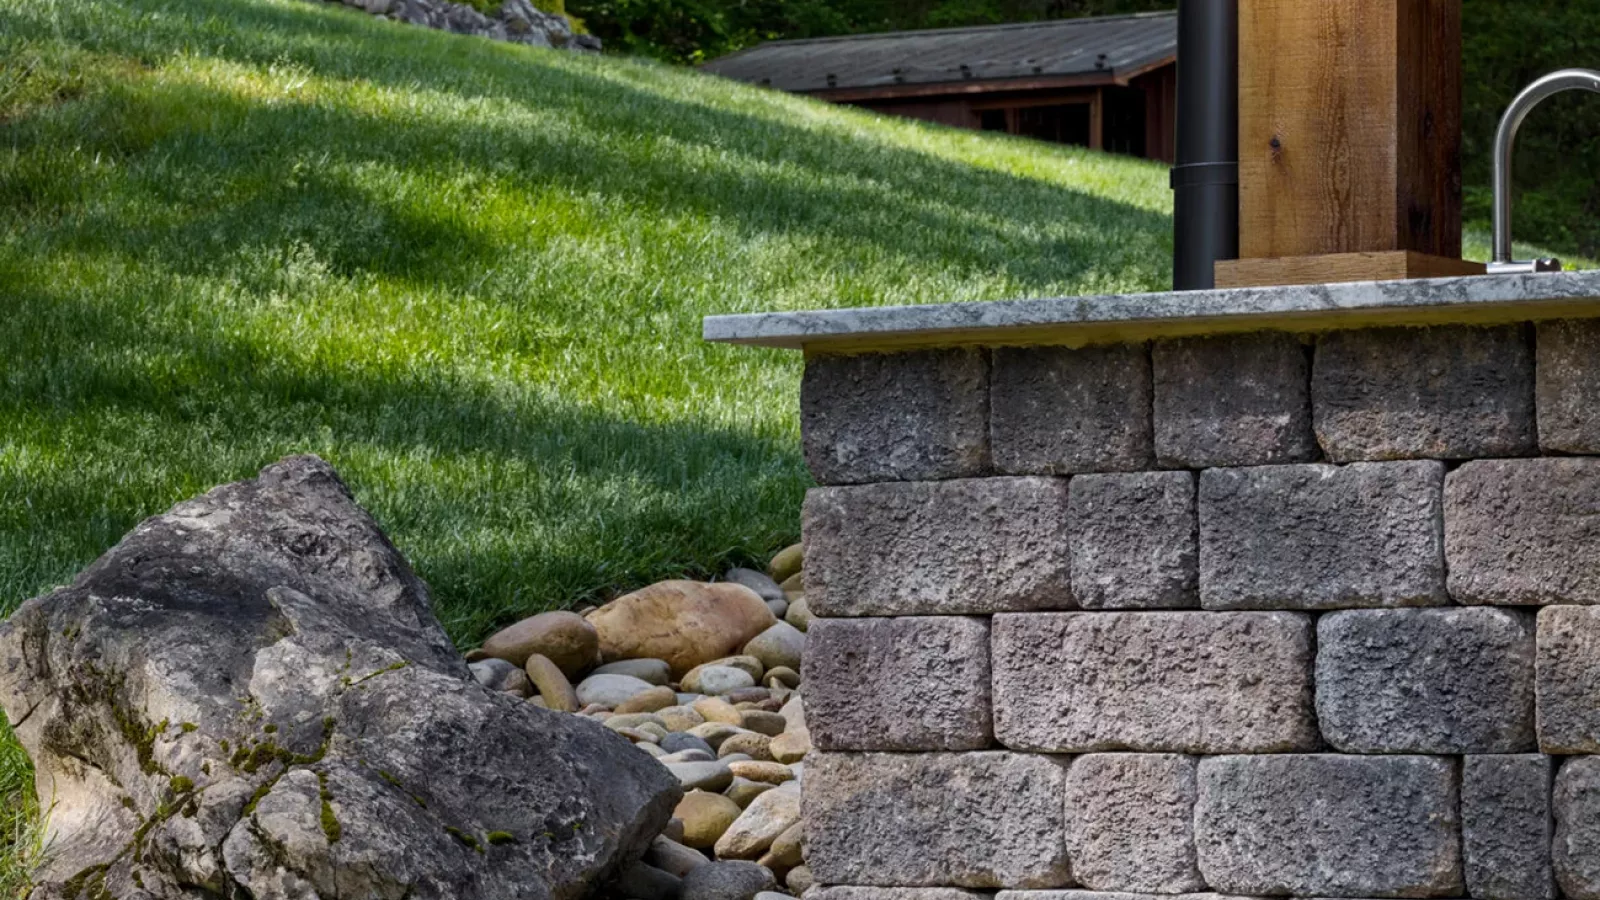 Castlemanor® Rustic wall system, encapsulating old-world charm with its rustic finish.